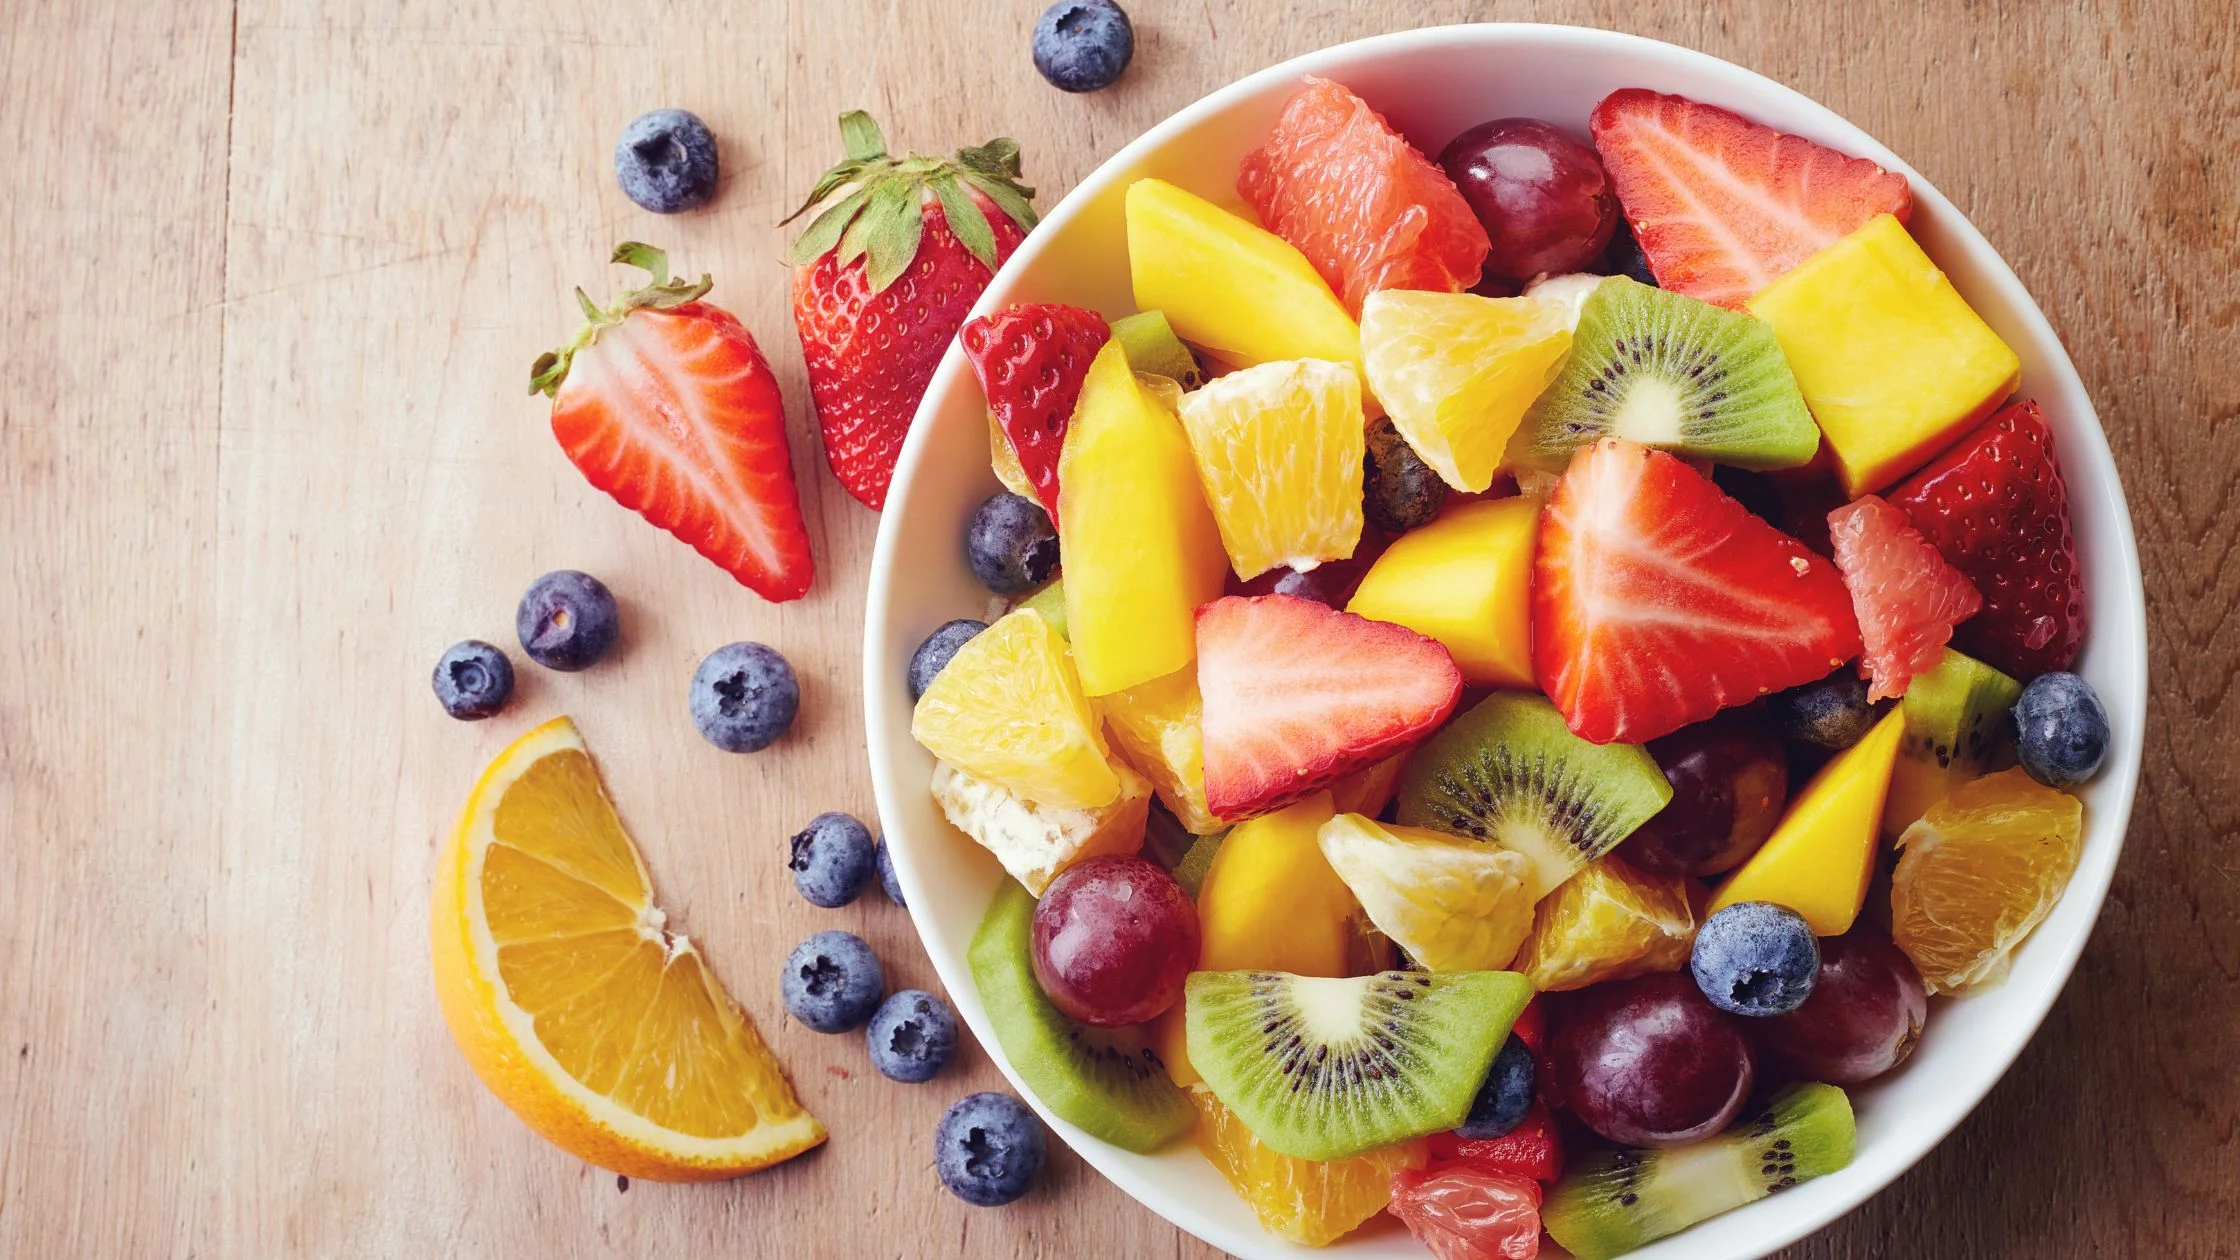 Fresh fruits for weight loss: delicious and low-calorie options